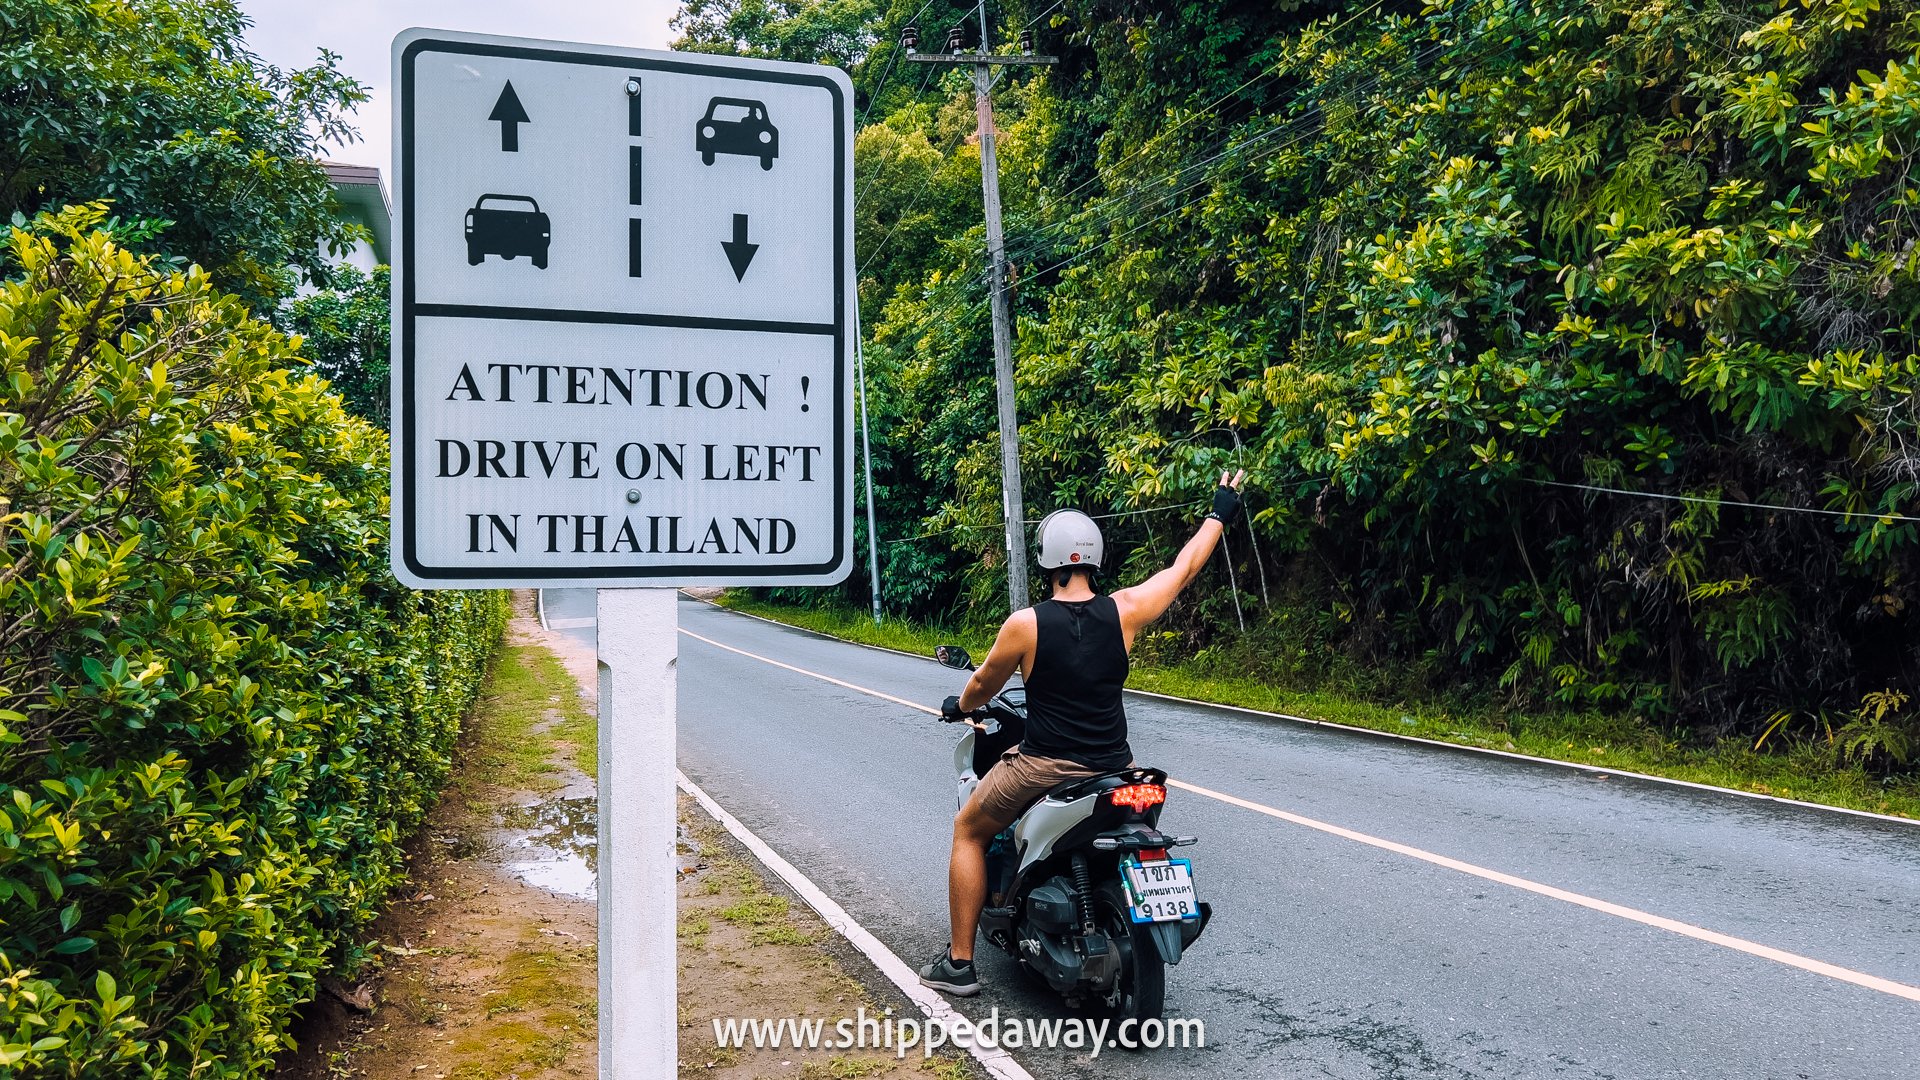 Renting a motorbike in Chiang Mai - how to get around Chiang Mai - best transportation options for exploring Chiang Mai